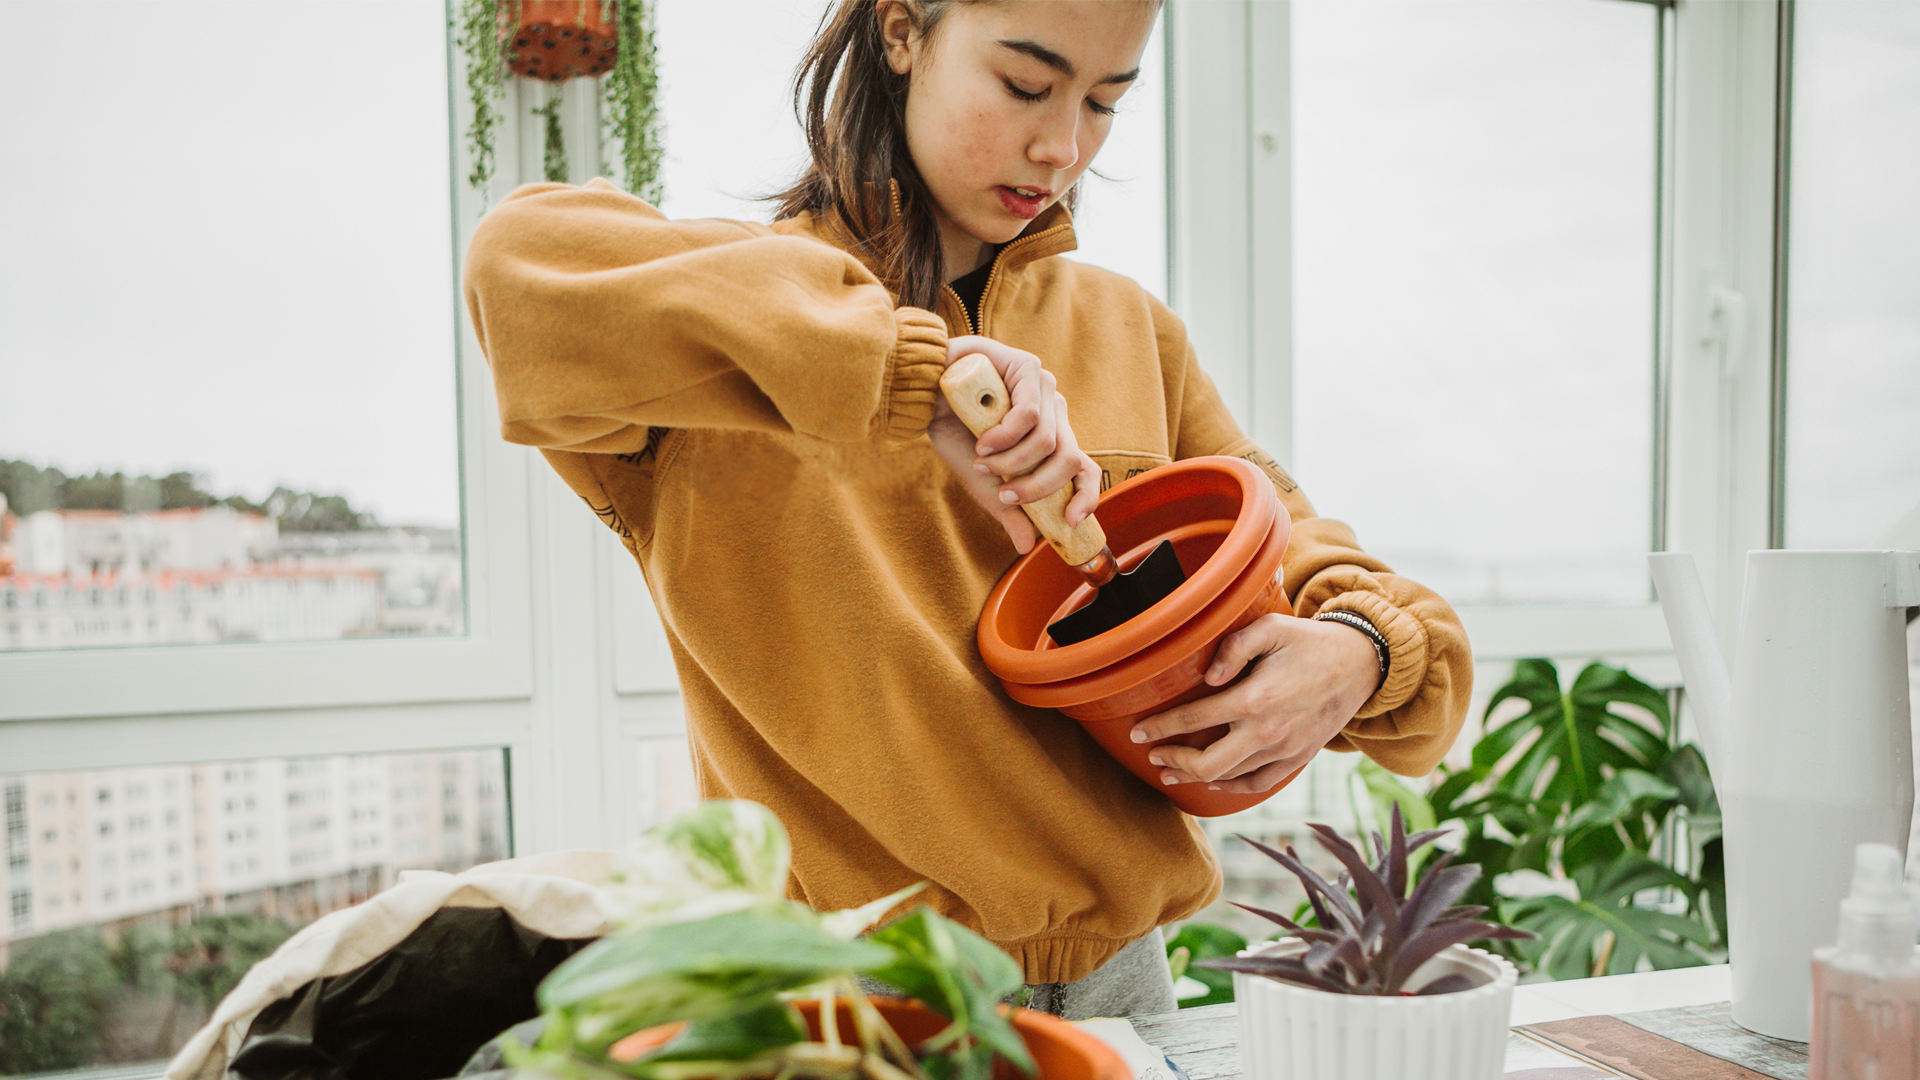 How to clean the air in your home: image of woman potting a plant